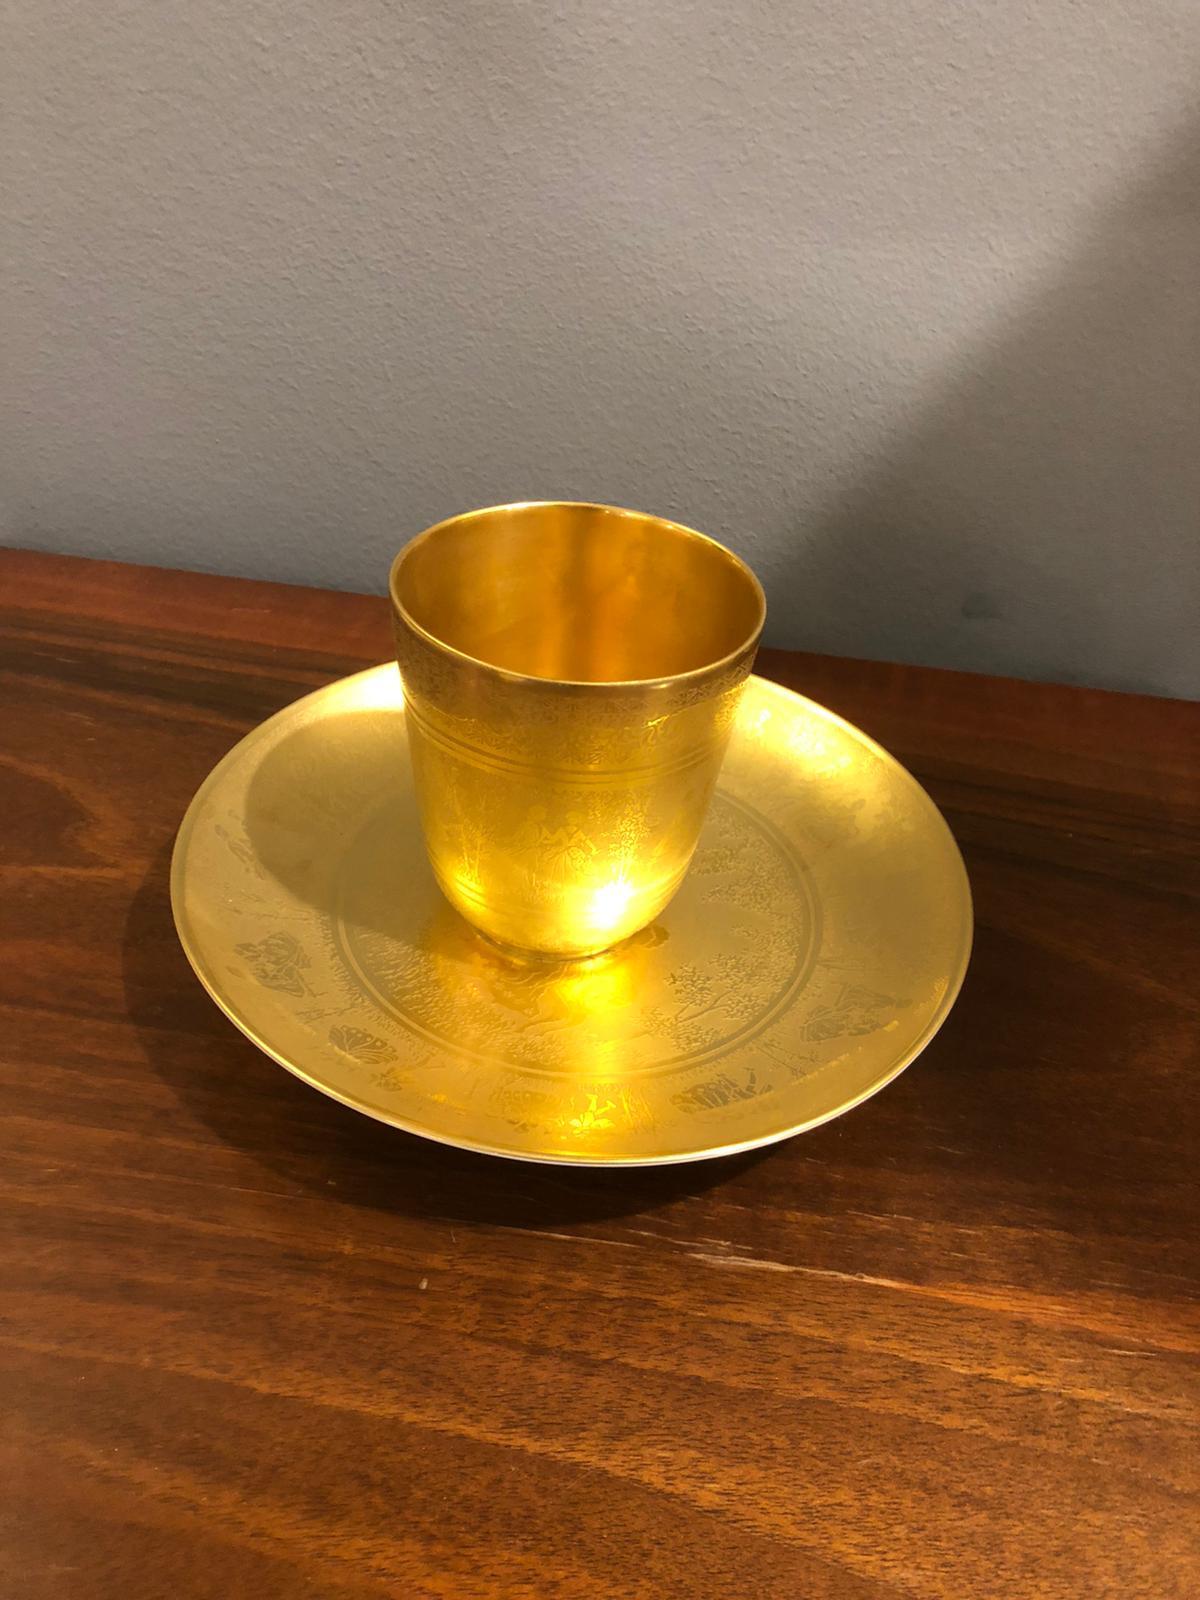 Beautiful set decorated with romantic themes and worked with pure gold. Logo printed on the bottom of both the plate and the cup. Perfect conditions.